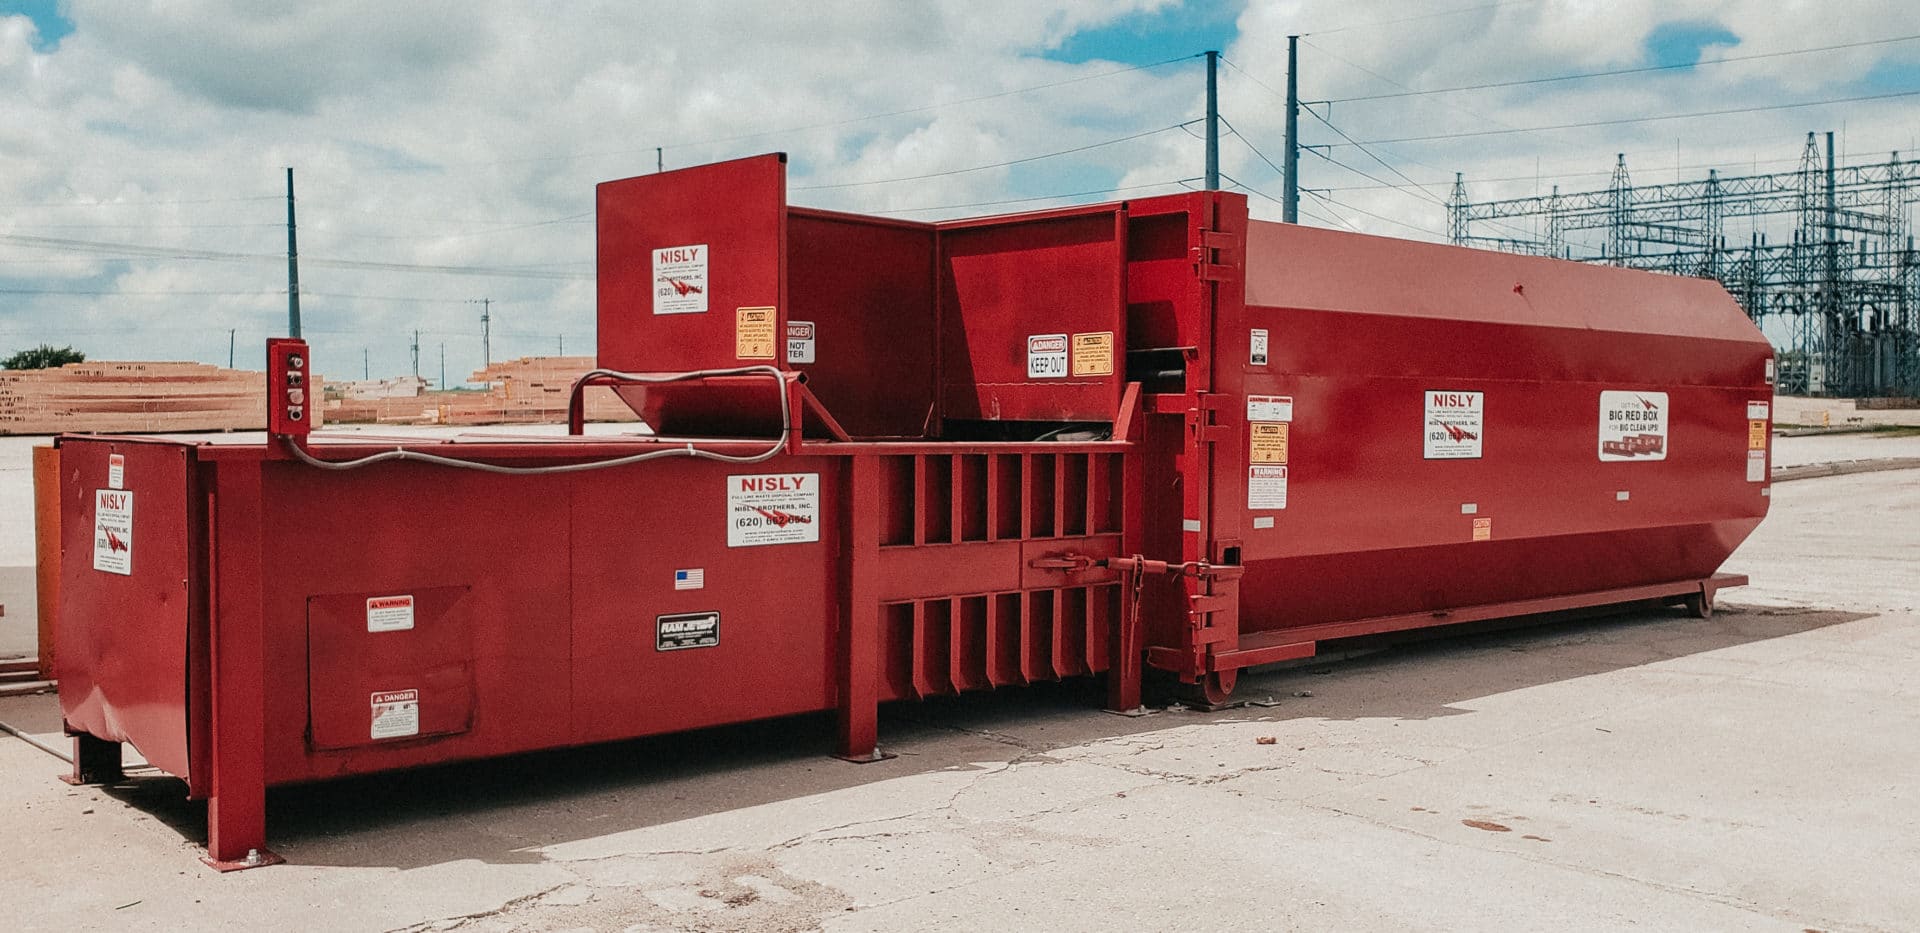 commercial trash compactor for commercial trash services in central kansas in reno county